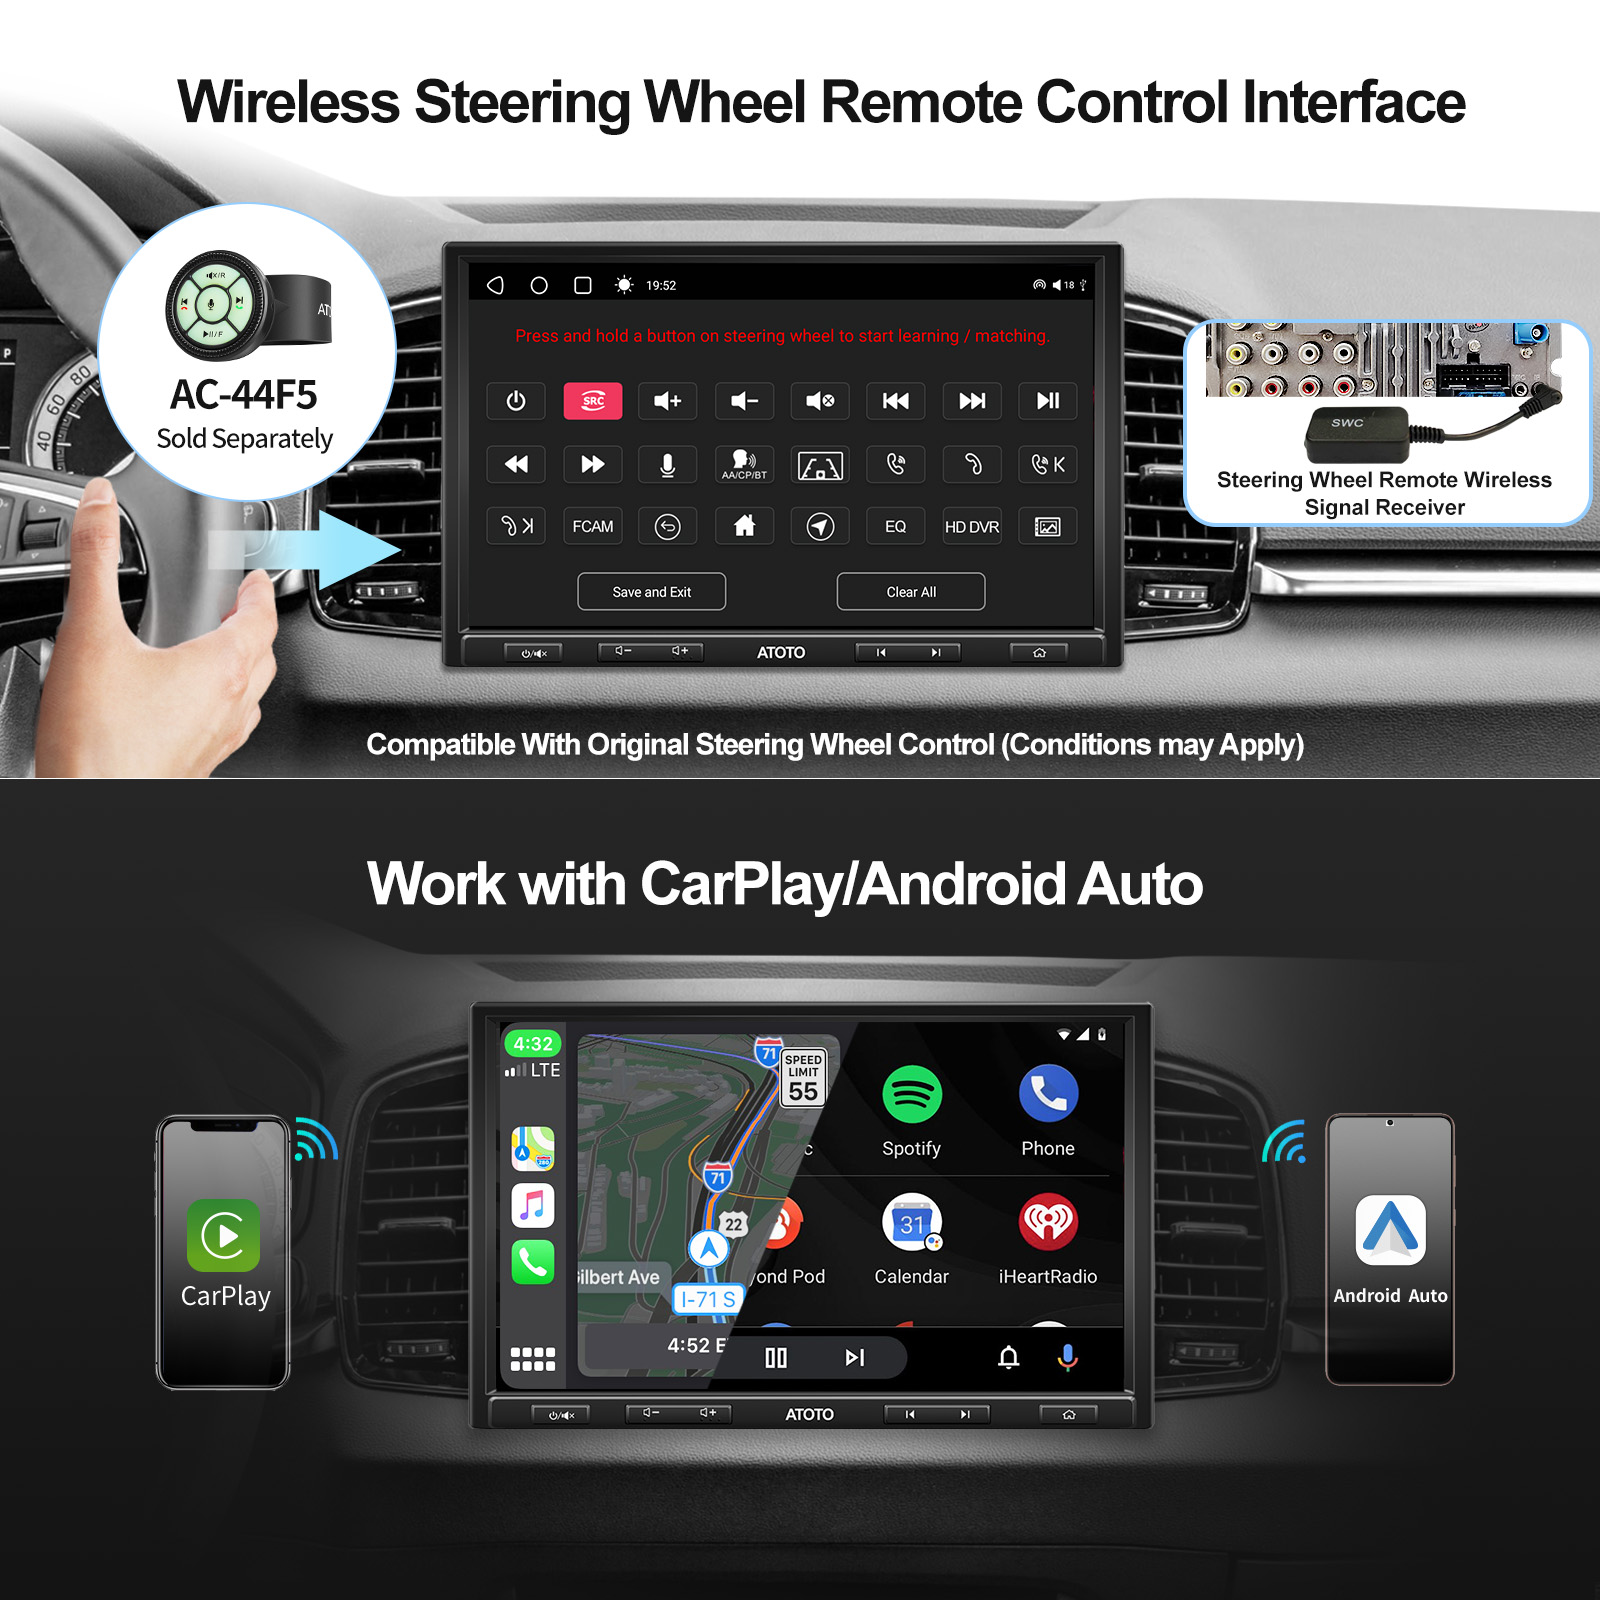 ATOTO S8G2A78UL N Double Din Car Stereo Wireless Apple Carplay and Android  Auto Mirrorlink 2 Bluetooth with aptx and aptxHD AM FM Radio Receiver Aux  in USB Double Din 7Inch Touchscreen%EF%BC%8Cuse Internet